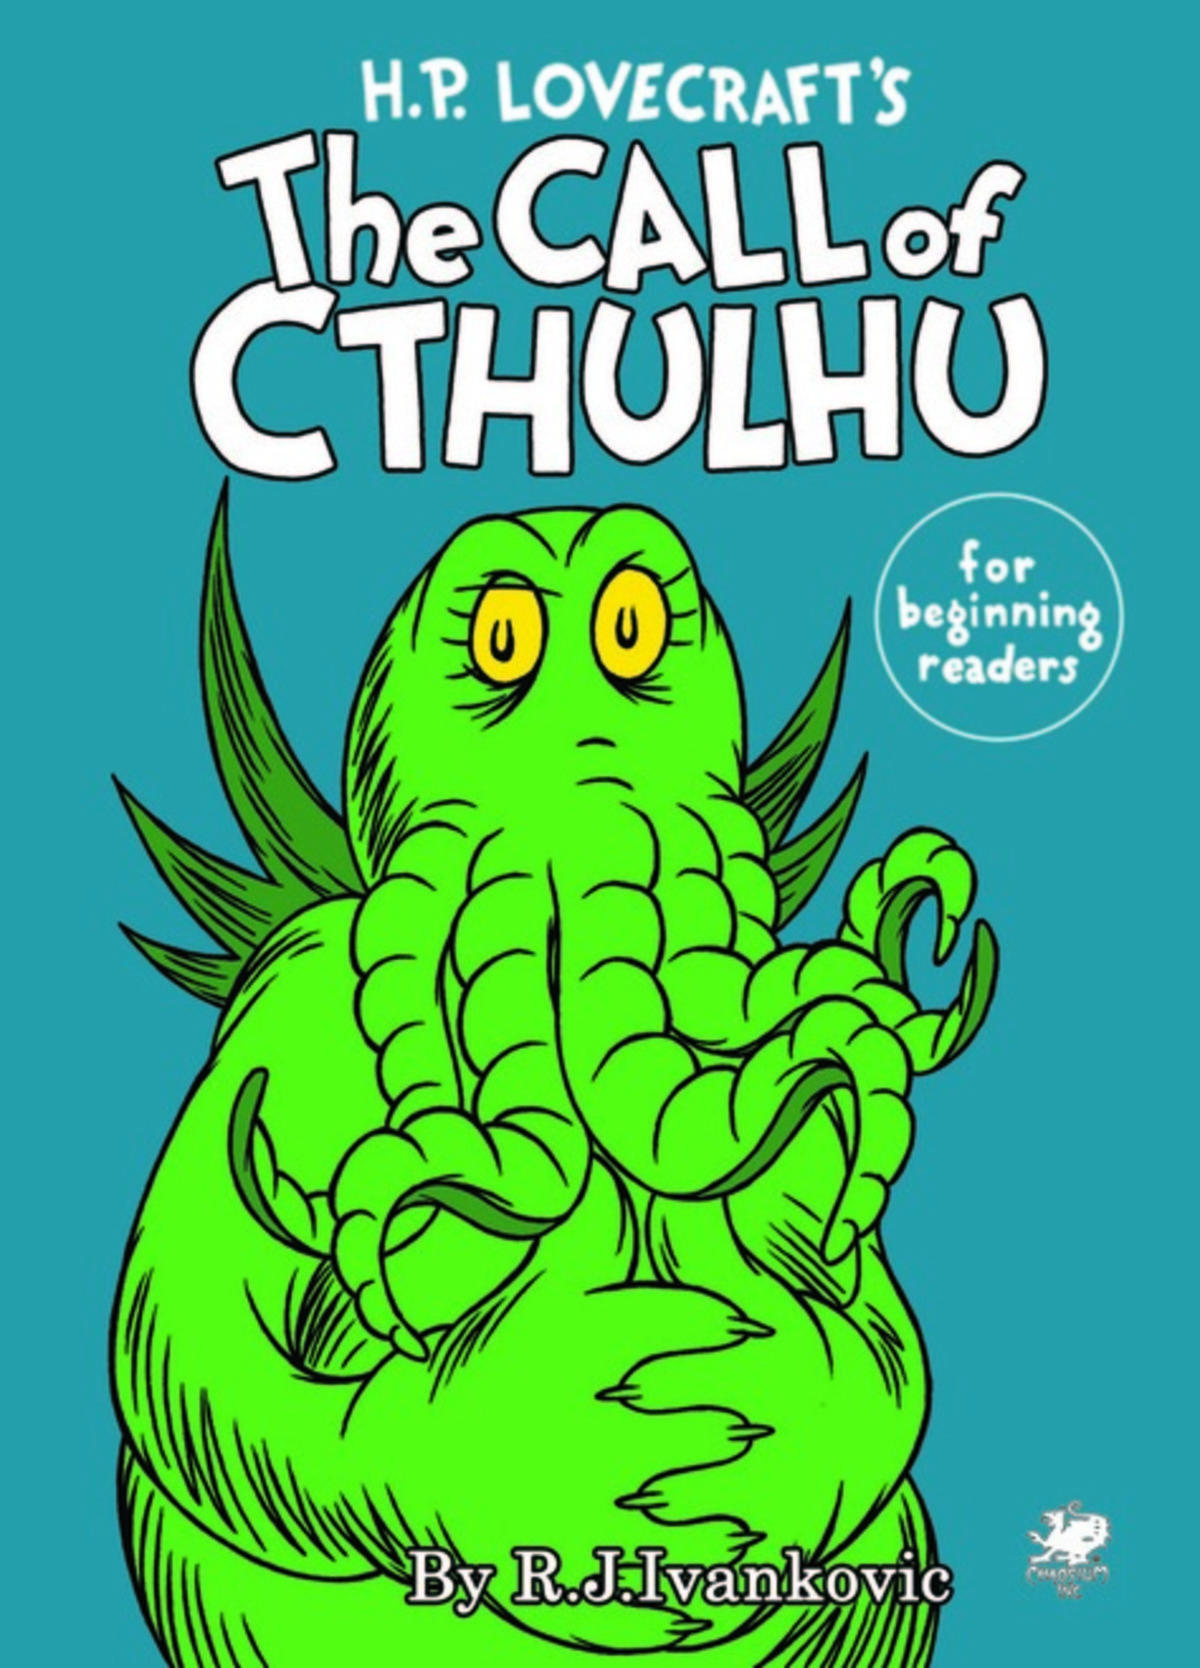 Call of Cthulhu is out now. ofCthulhu/ join list: SnortingVideogames (124 subs)Mention History.. i bought this book for my nephew for christmas.